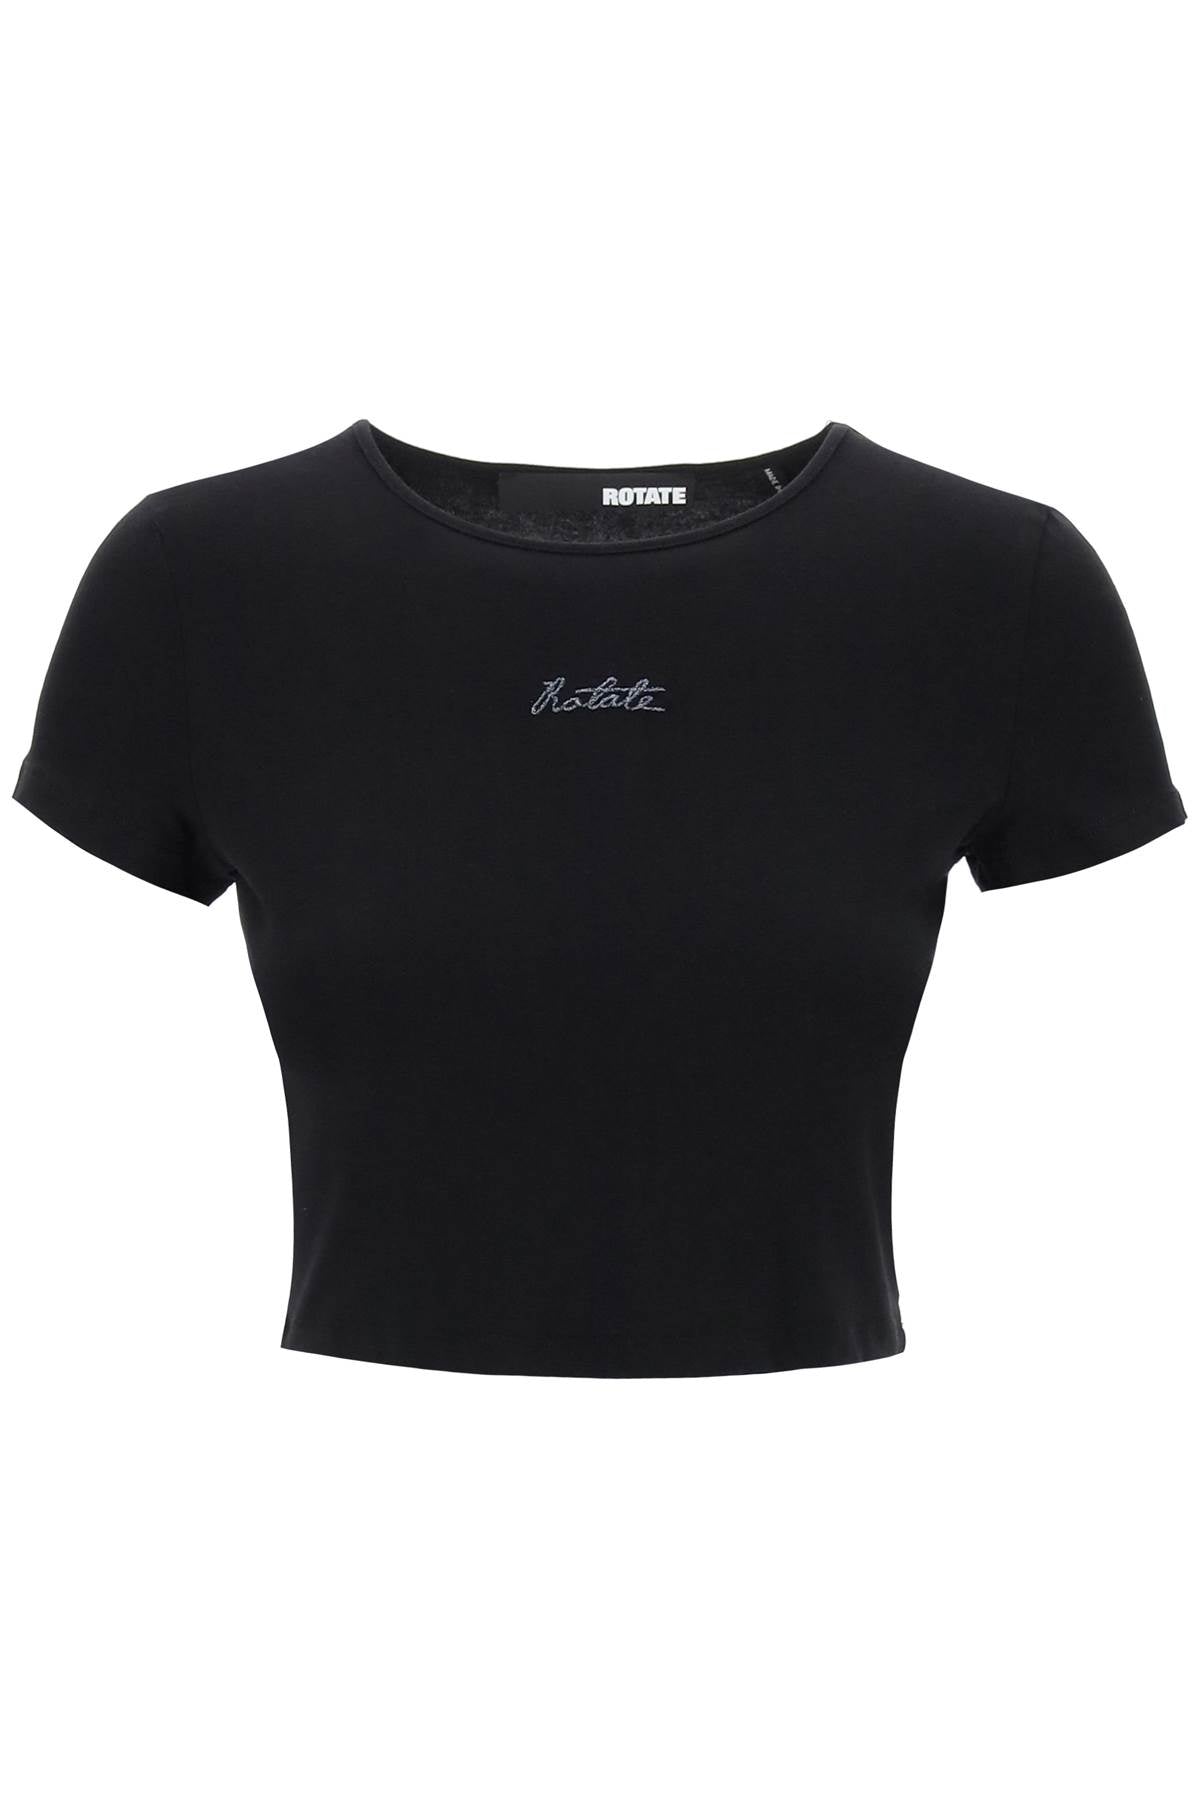 Rotate cropped t-shirt with embroidered lurex logo-0